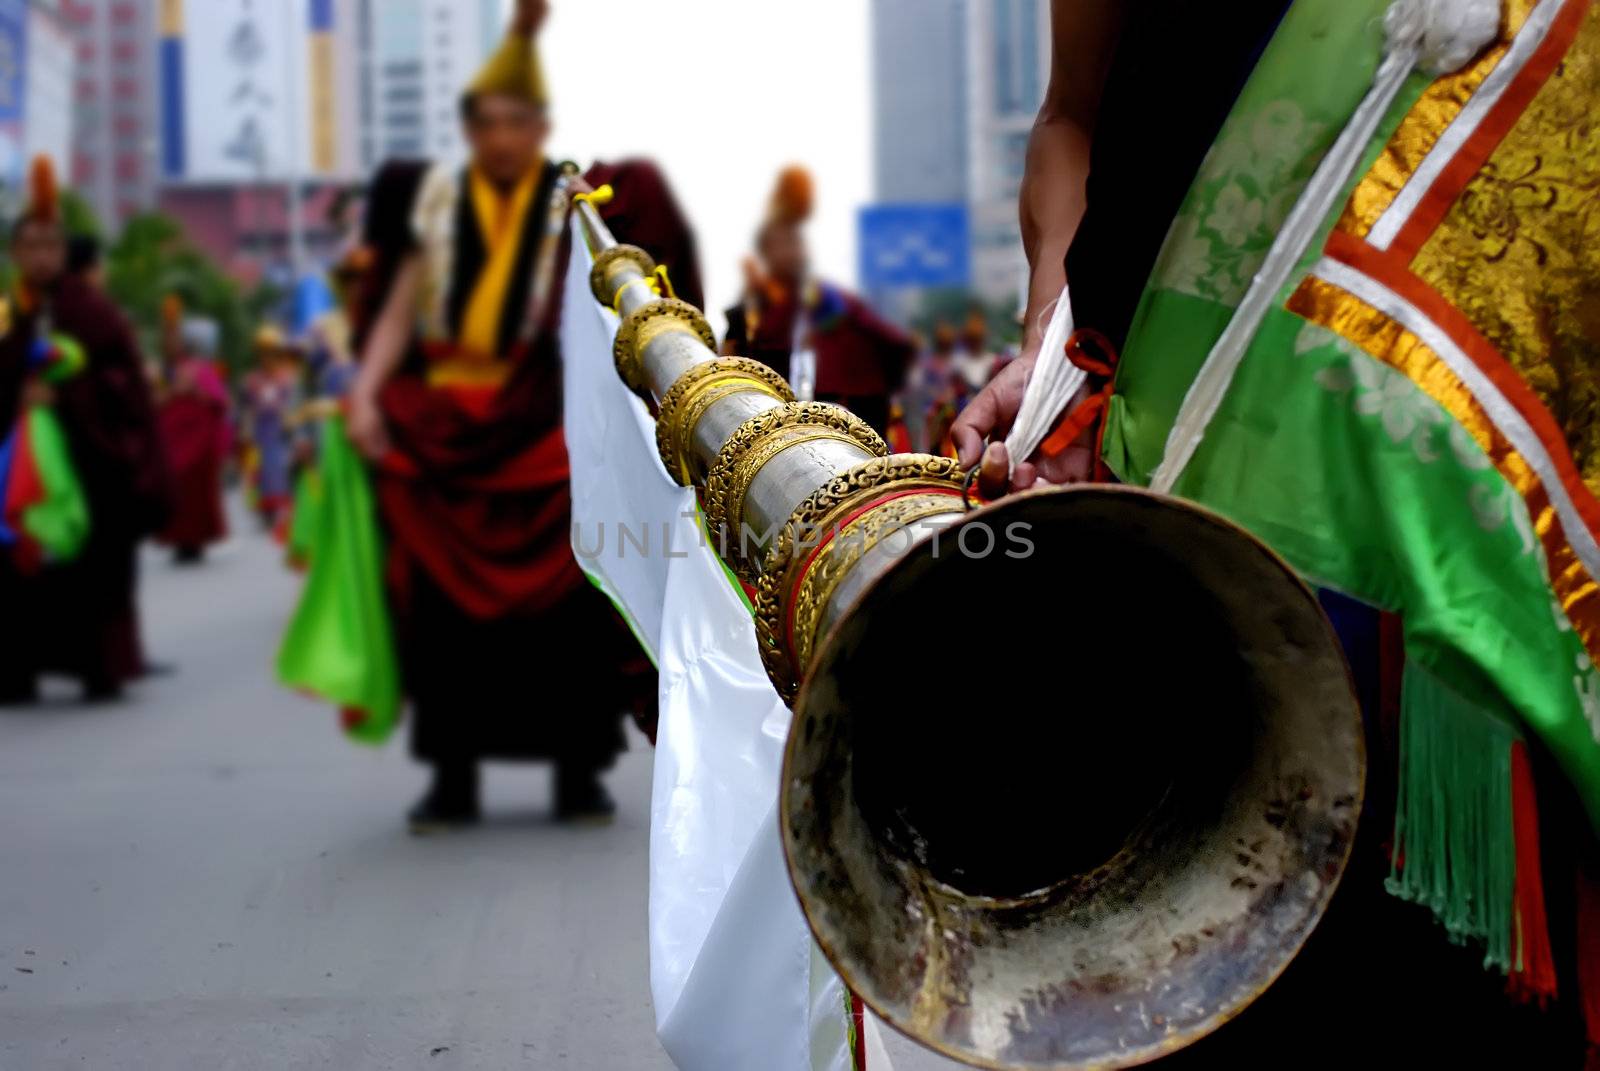 CHENGDU - MAY 23: Lama blow tibetan long horn in the 1st International Festival of the Intangible Cultural Heritage China,2007 on May 23, 2007 in Chengdu, China.
